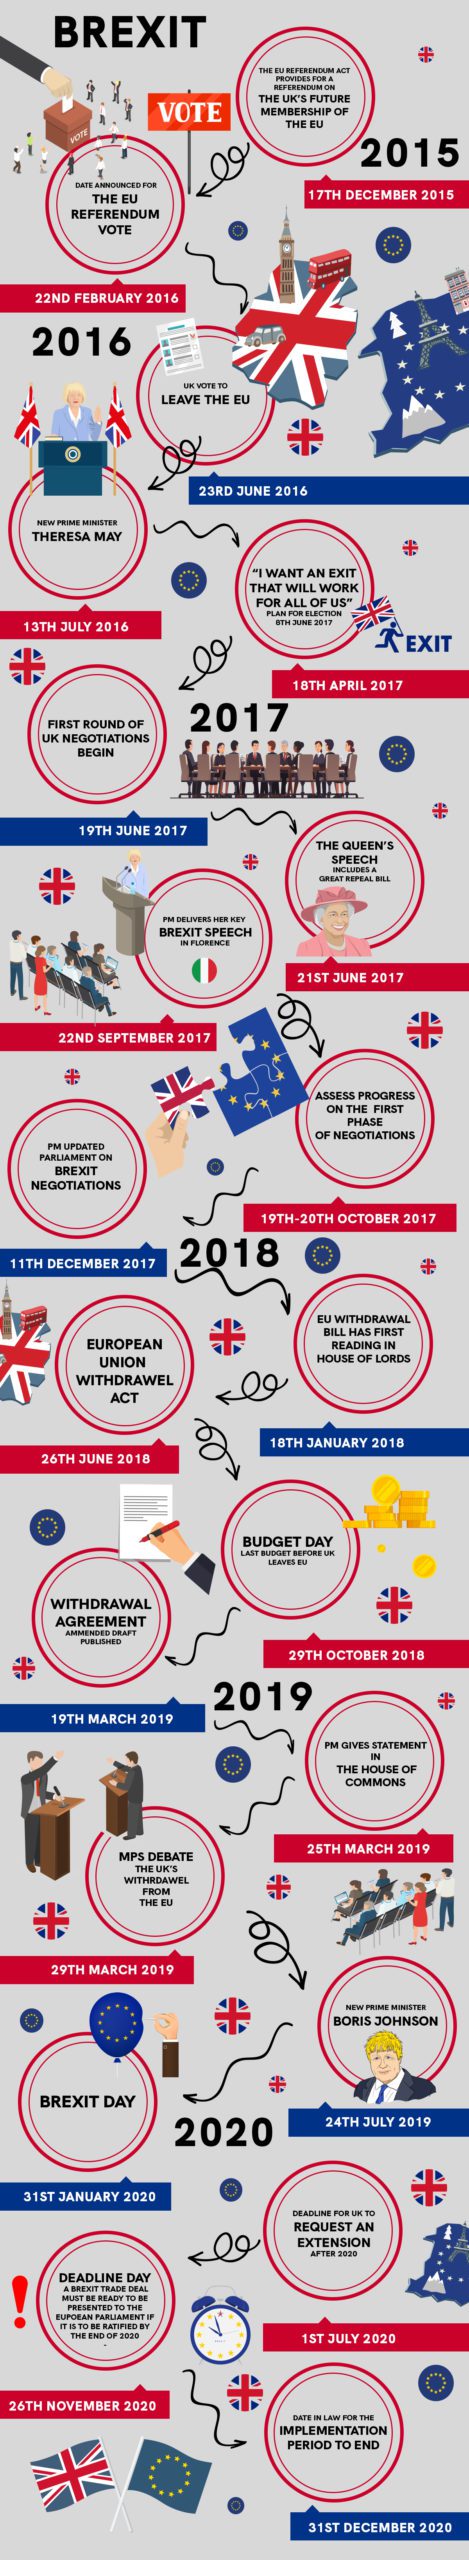 Brexit Timeline infographic